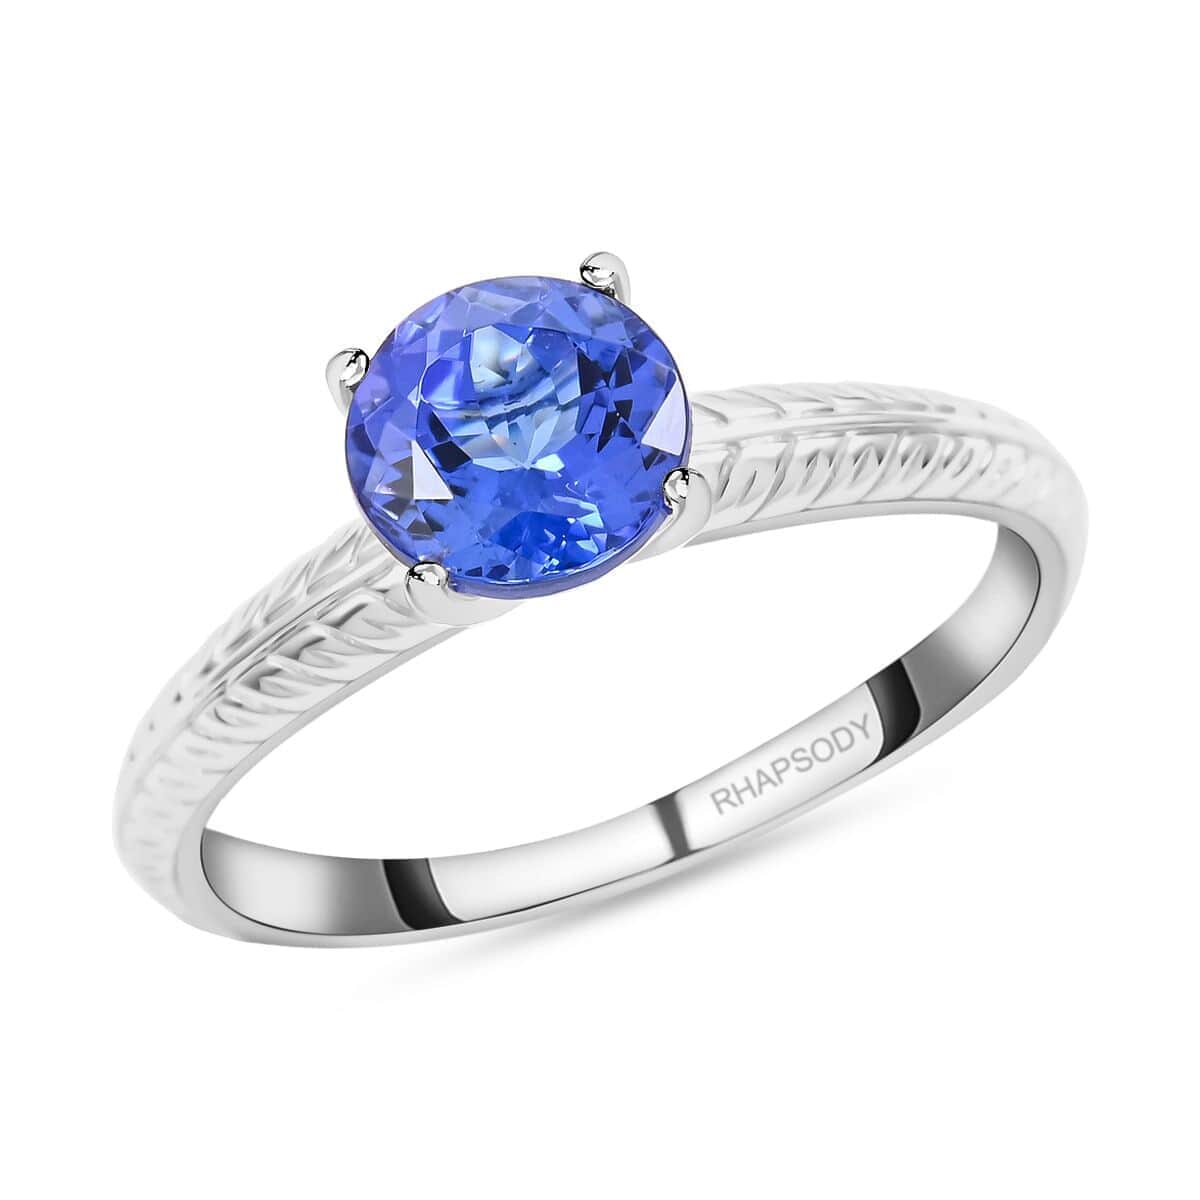 Doorbuster Certified & Appraised Rhapsody 950 Platinum AAAA Tanzanite Solitaire Ring (Size 9.0) (4.65 g) 1.50 ctw image number 0